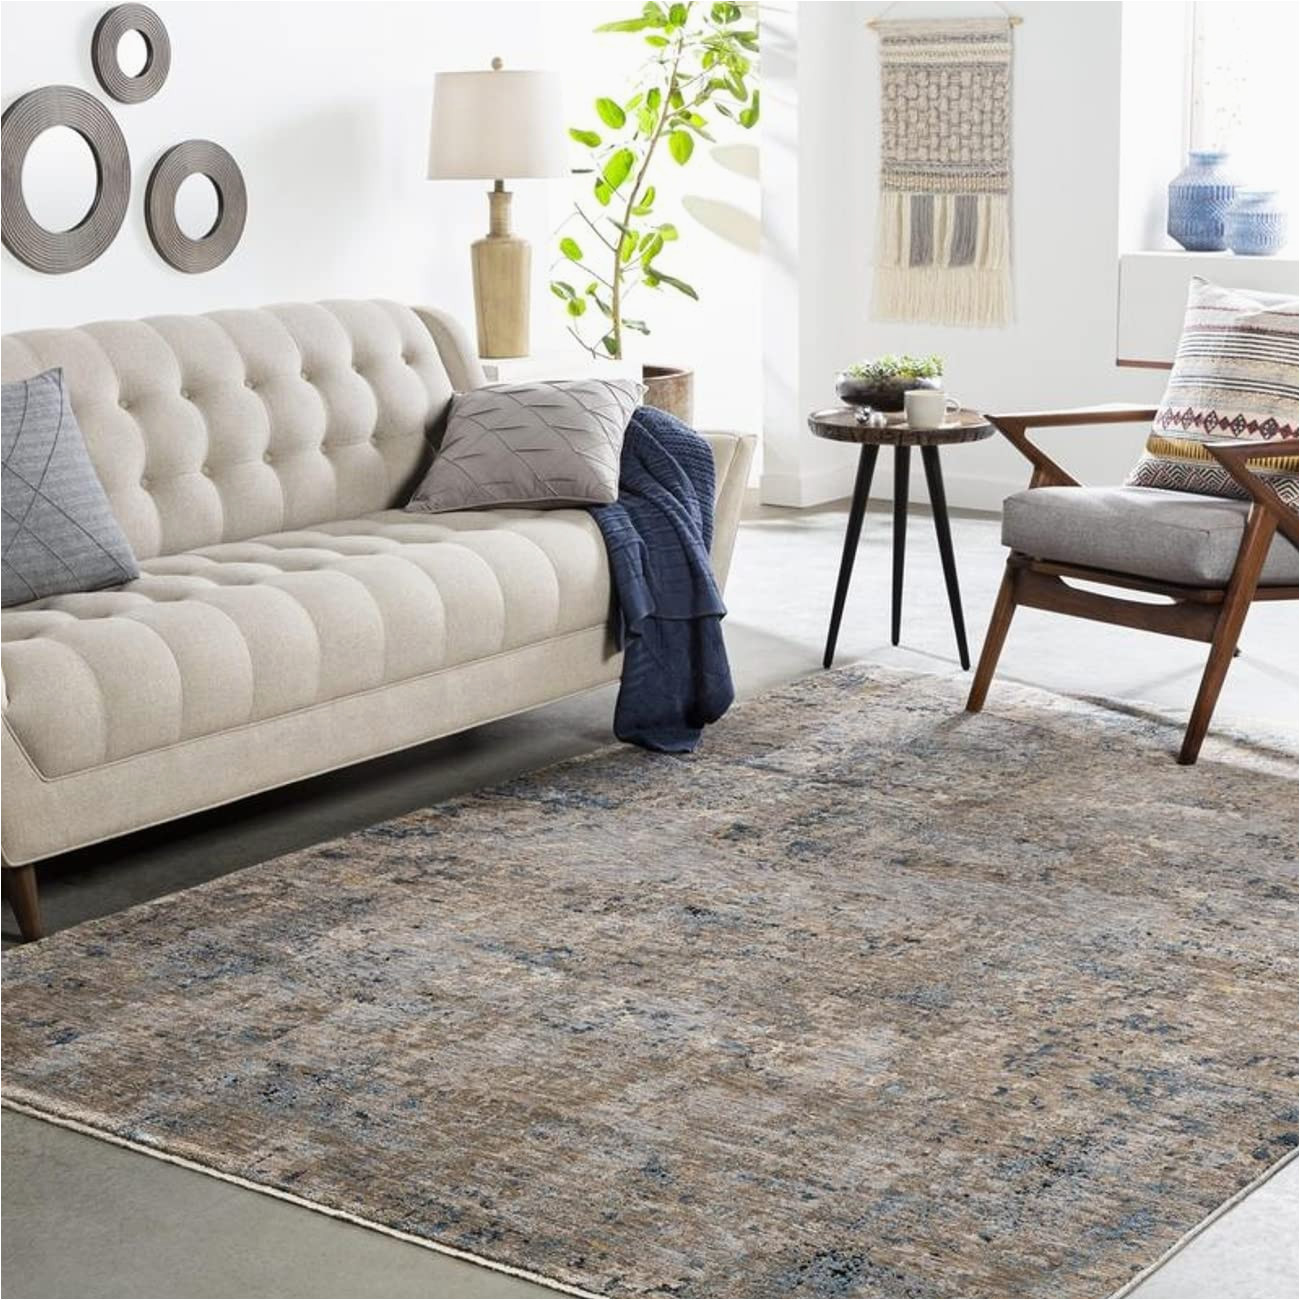 10 X 14 area Rugs On Sale Mark&day area Rugs, 10×14 Rul Modern Dark Brown area Rug, Brown / Gray Carpet for Living Room, Bedroom or Kitchen (10′ X 14′)